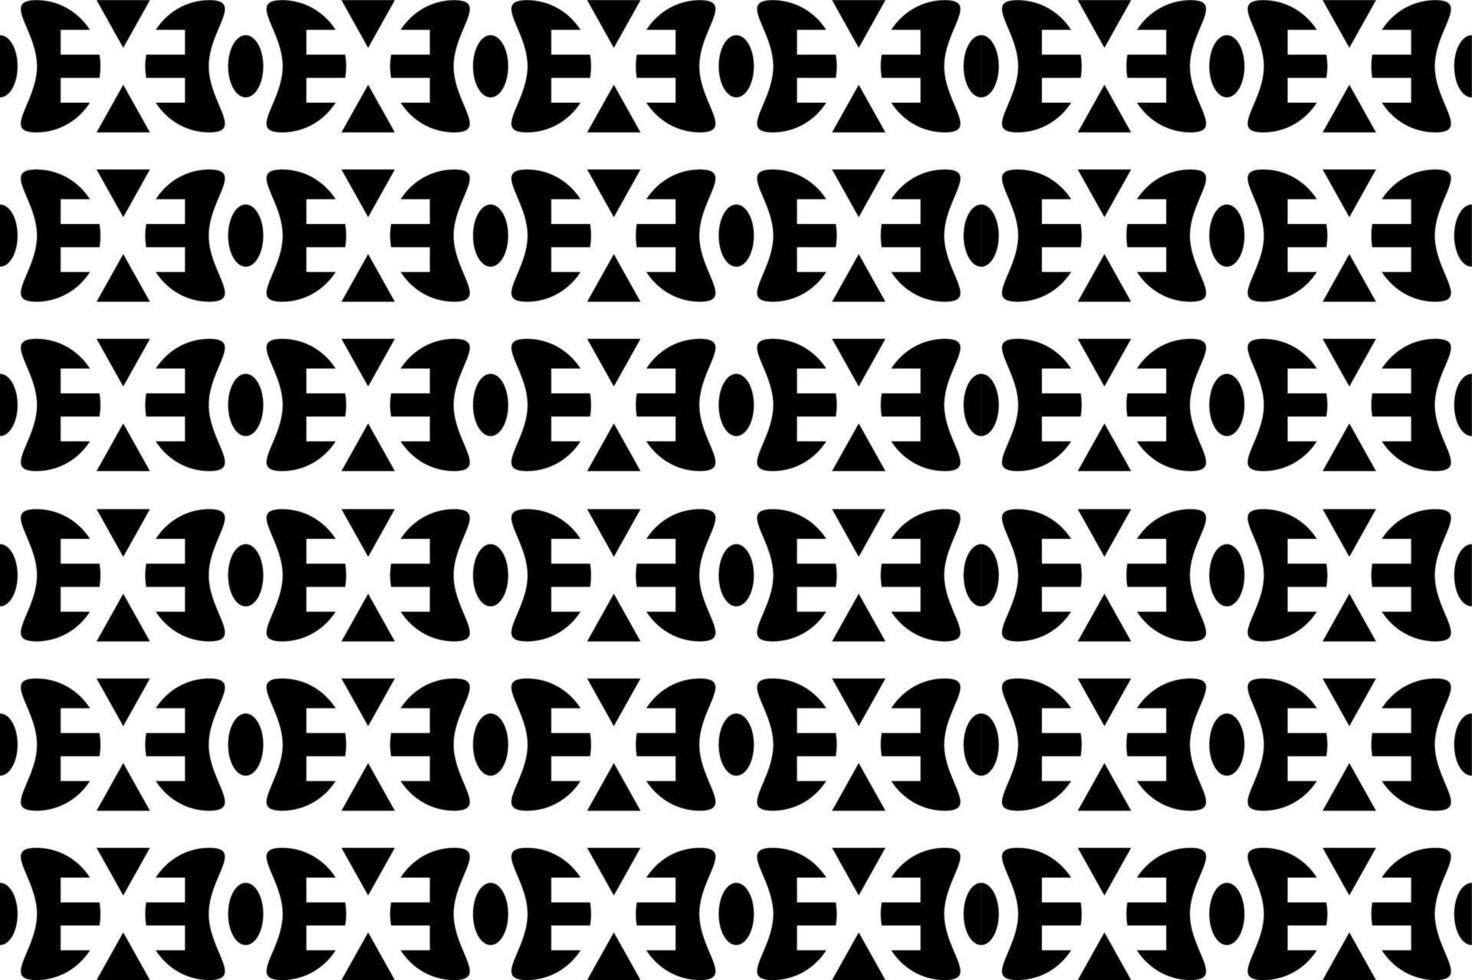 Abstract black and white pattern. Monochrome seamless geometric pattern. Repeating shapes, geometric elements. vector